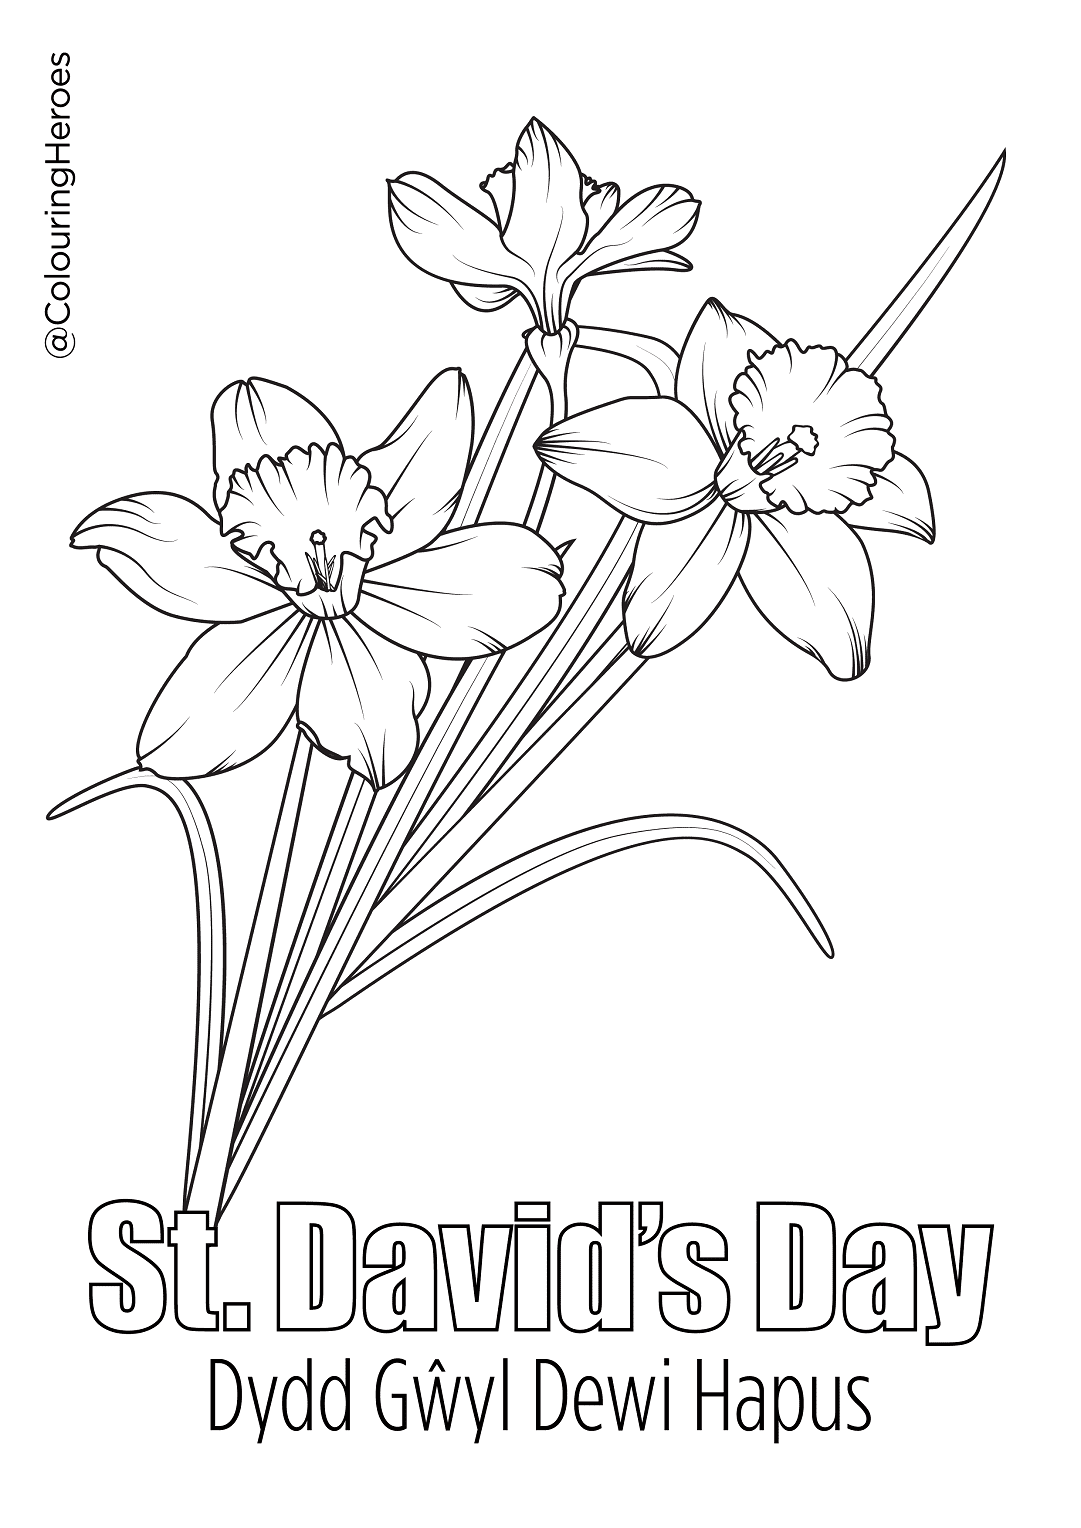 St Davids Day Free Coloring Page